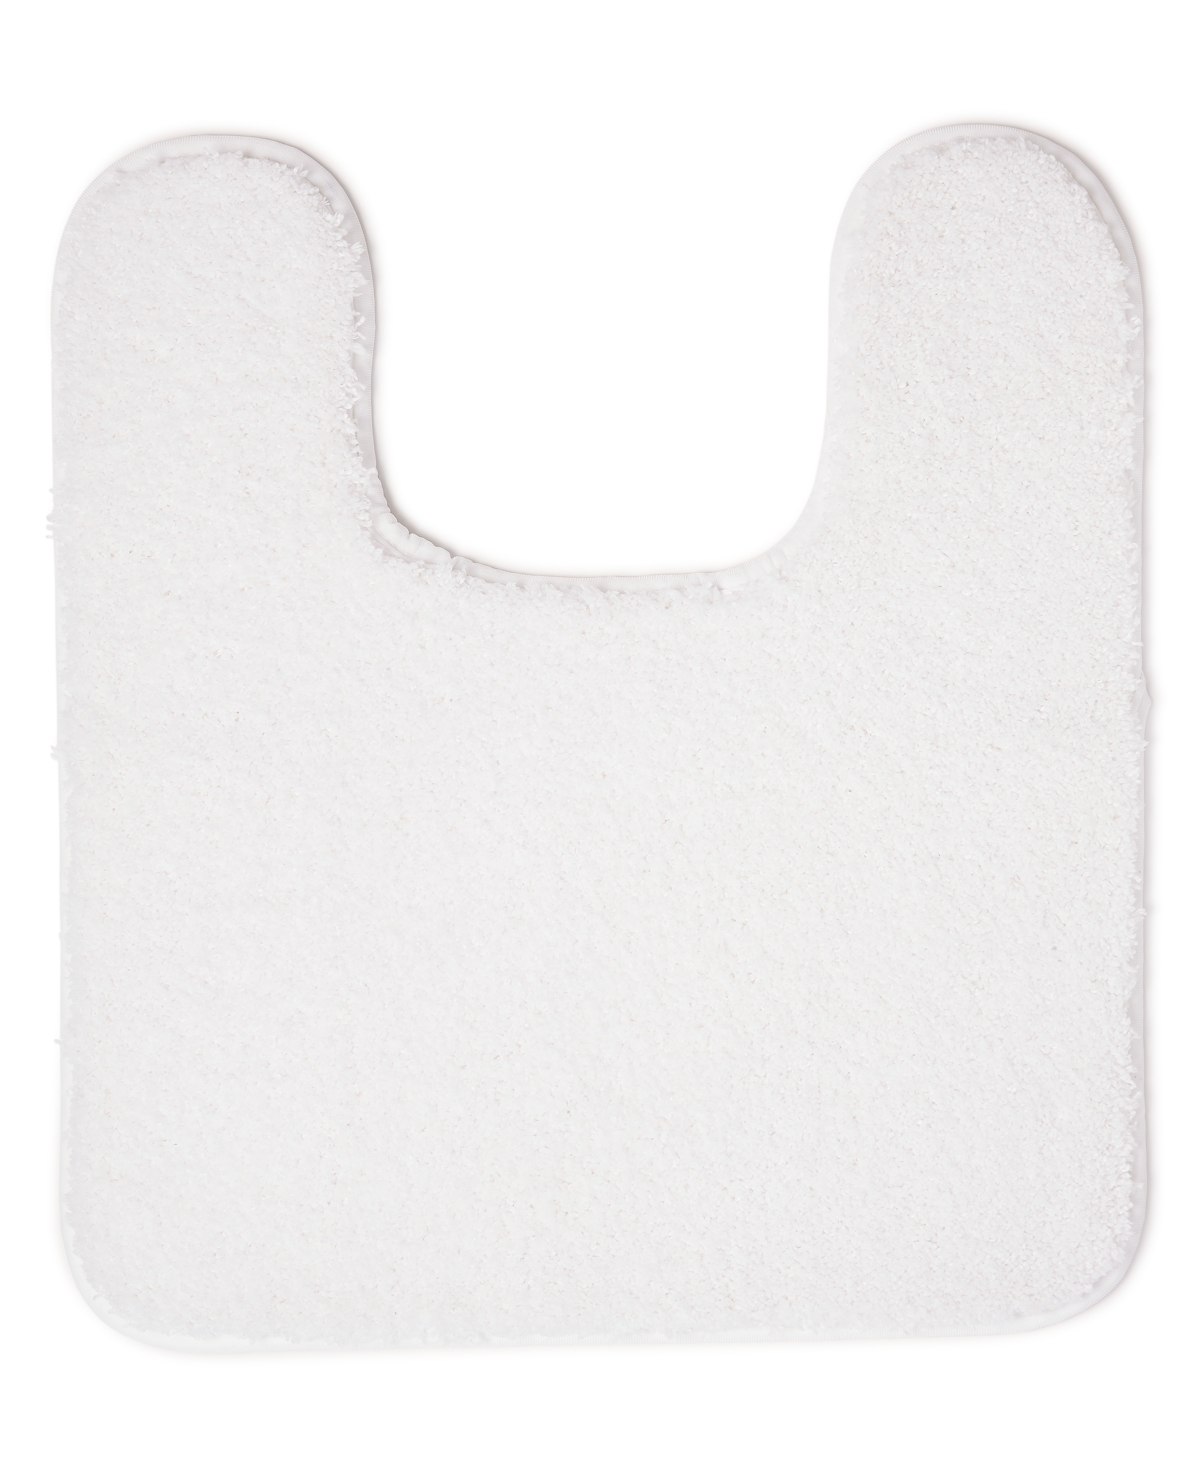 Shop Charter Club Elite Contour Bath Rug, Created For Macy's In White